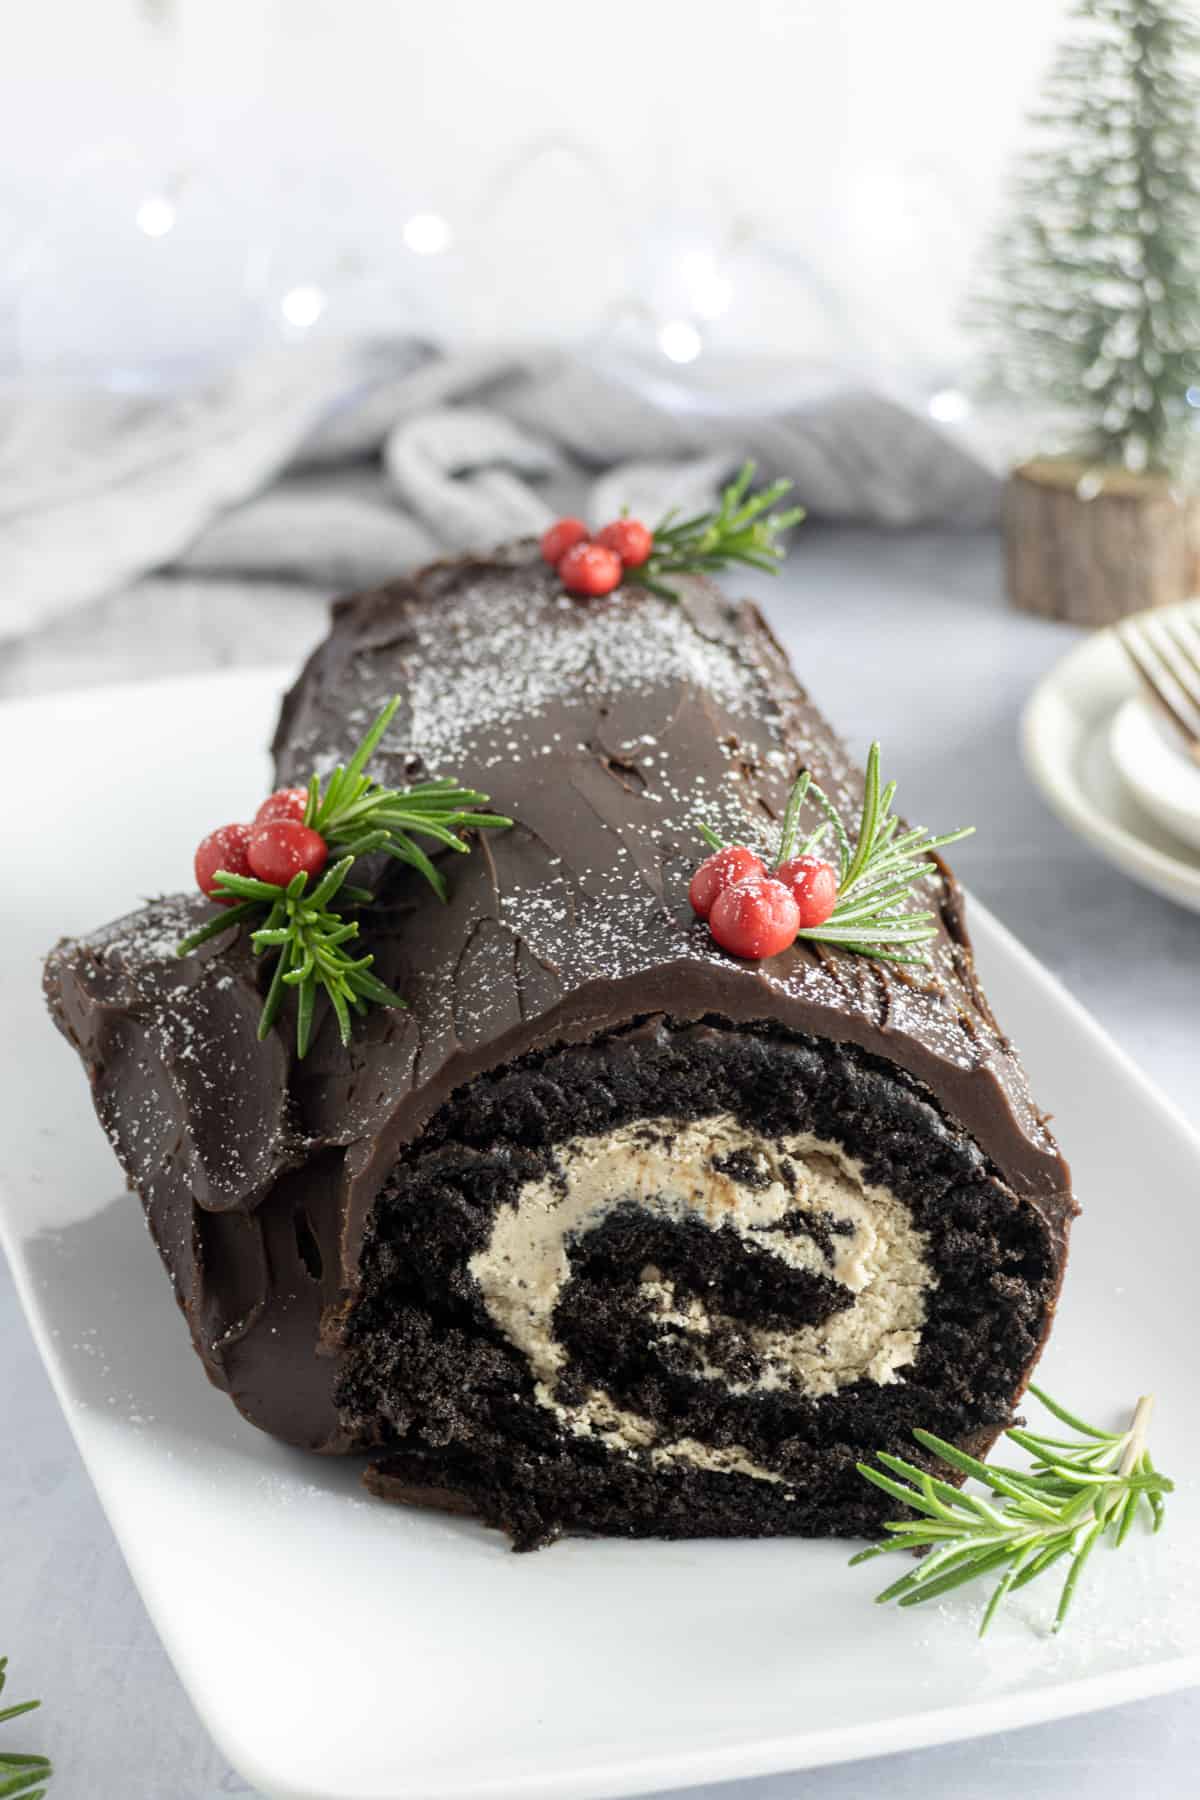 Chocolate roulade decorated with chocolate icing and icing sugar